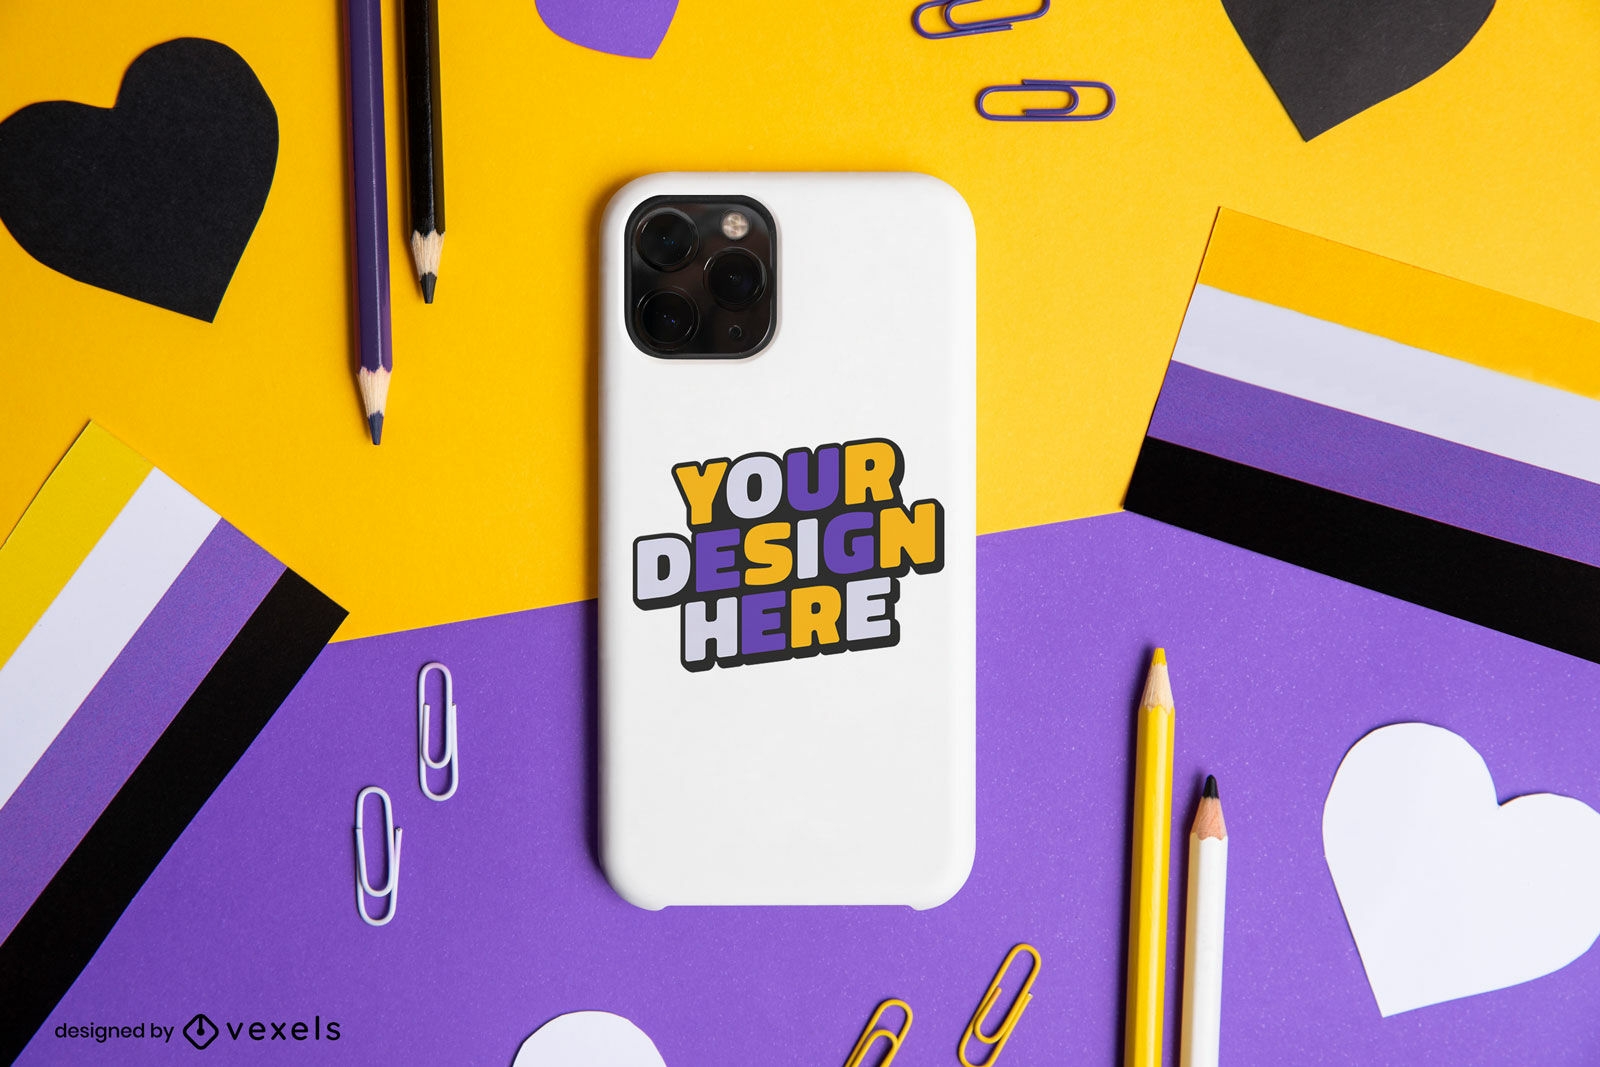 Non binary flags and phone case mockup